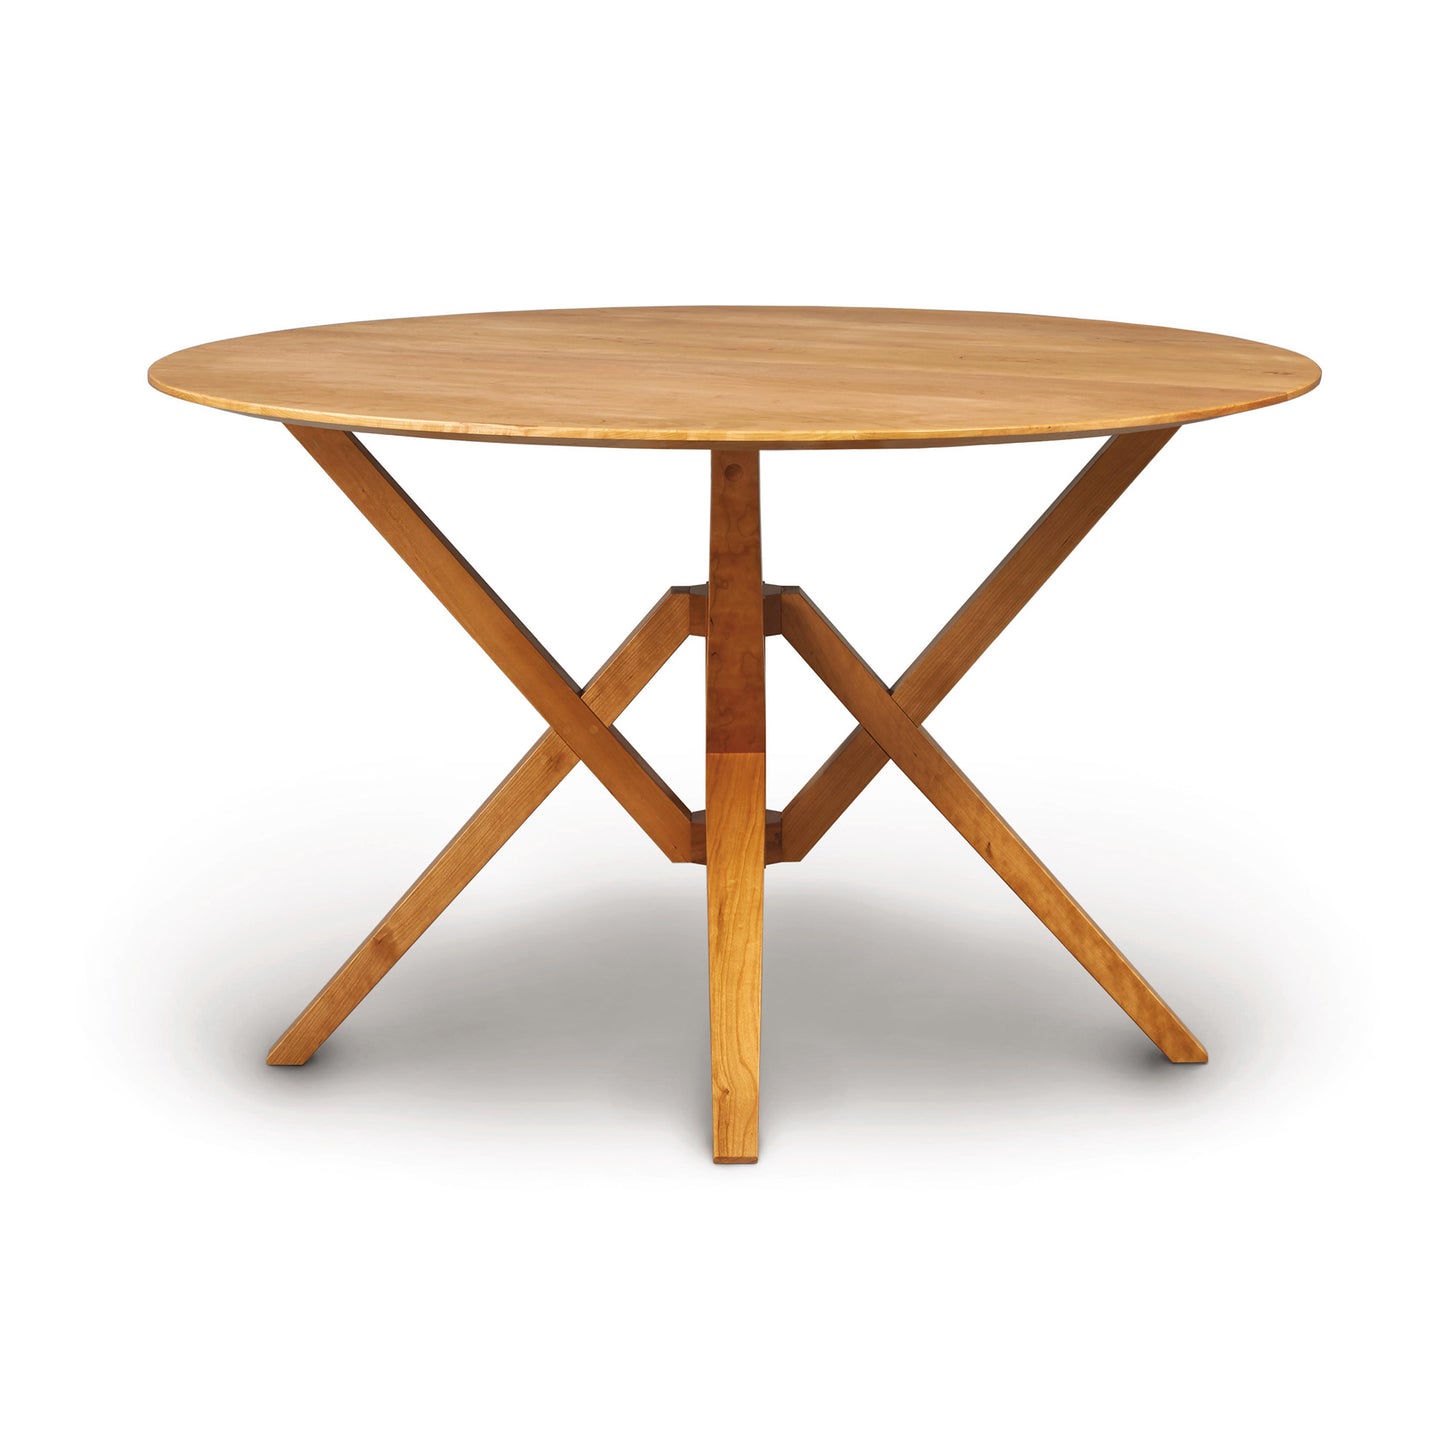 A round wooden Copeland Furniture Exeter Round Solid Top Dining Table with a cross-brace leg design, crafted from sustainably harvested hardwoods, isolated on a white background.